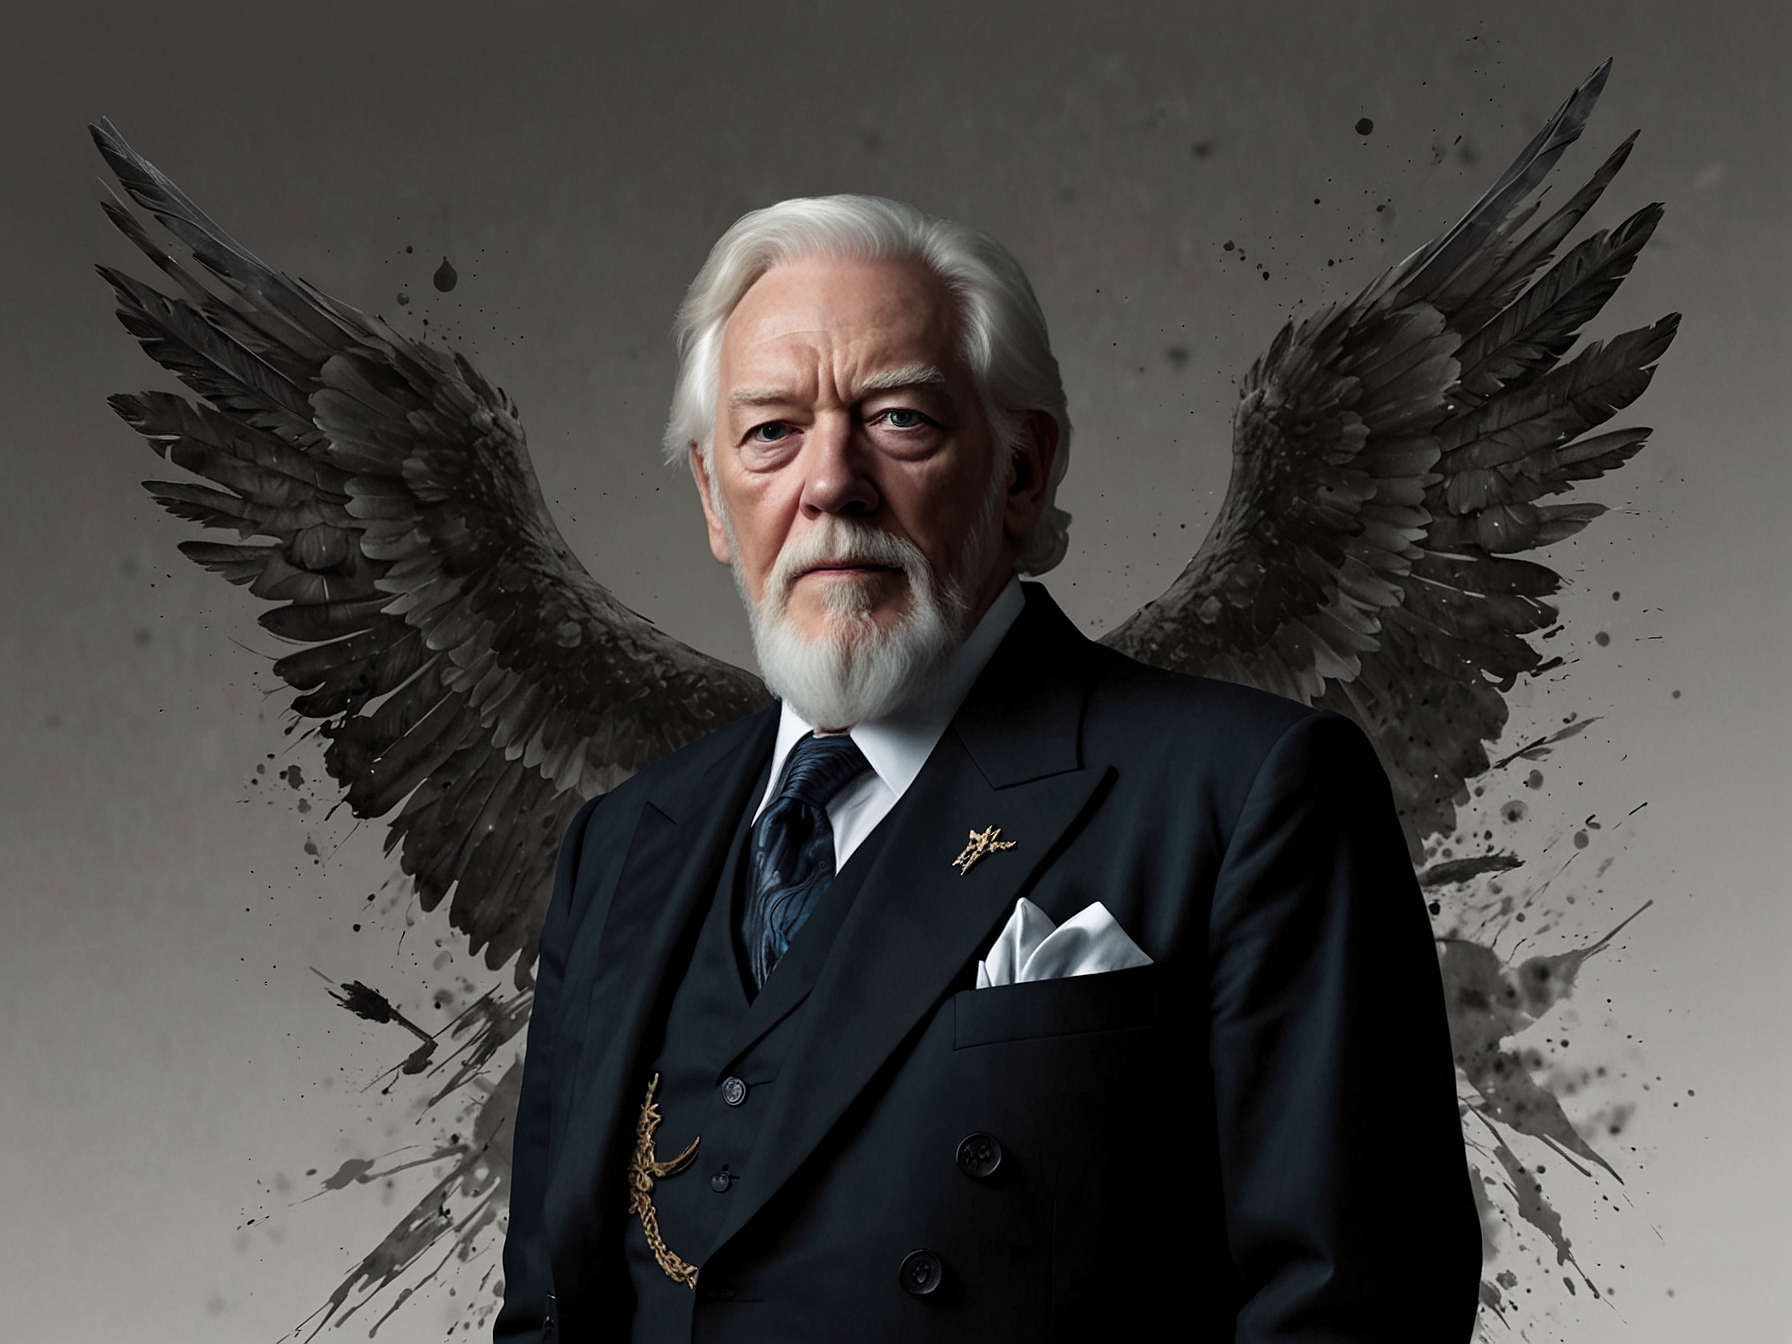 A photo of Donald Sutherland as President Snow in the 'Hunger Games' series, portraying his chilling and captivating performance that introduced him to a new generation of fans.